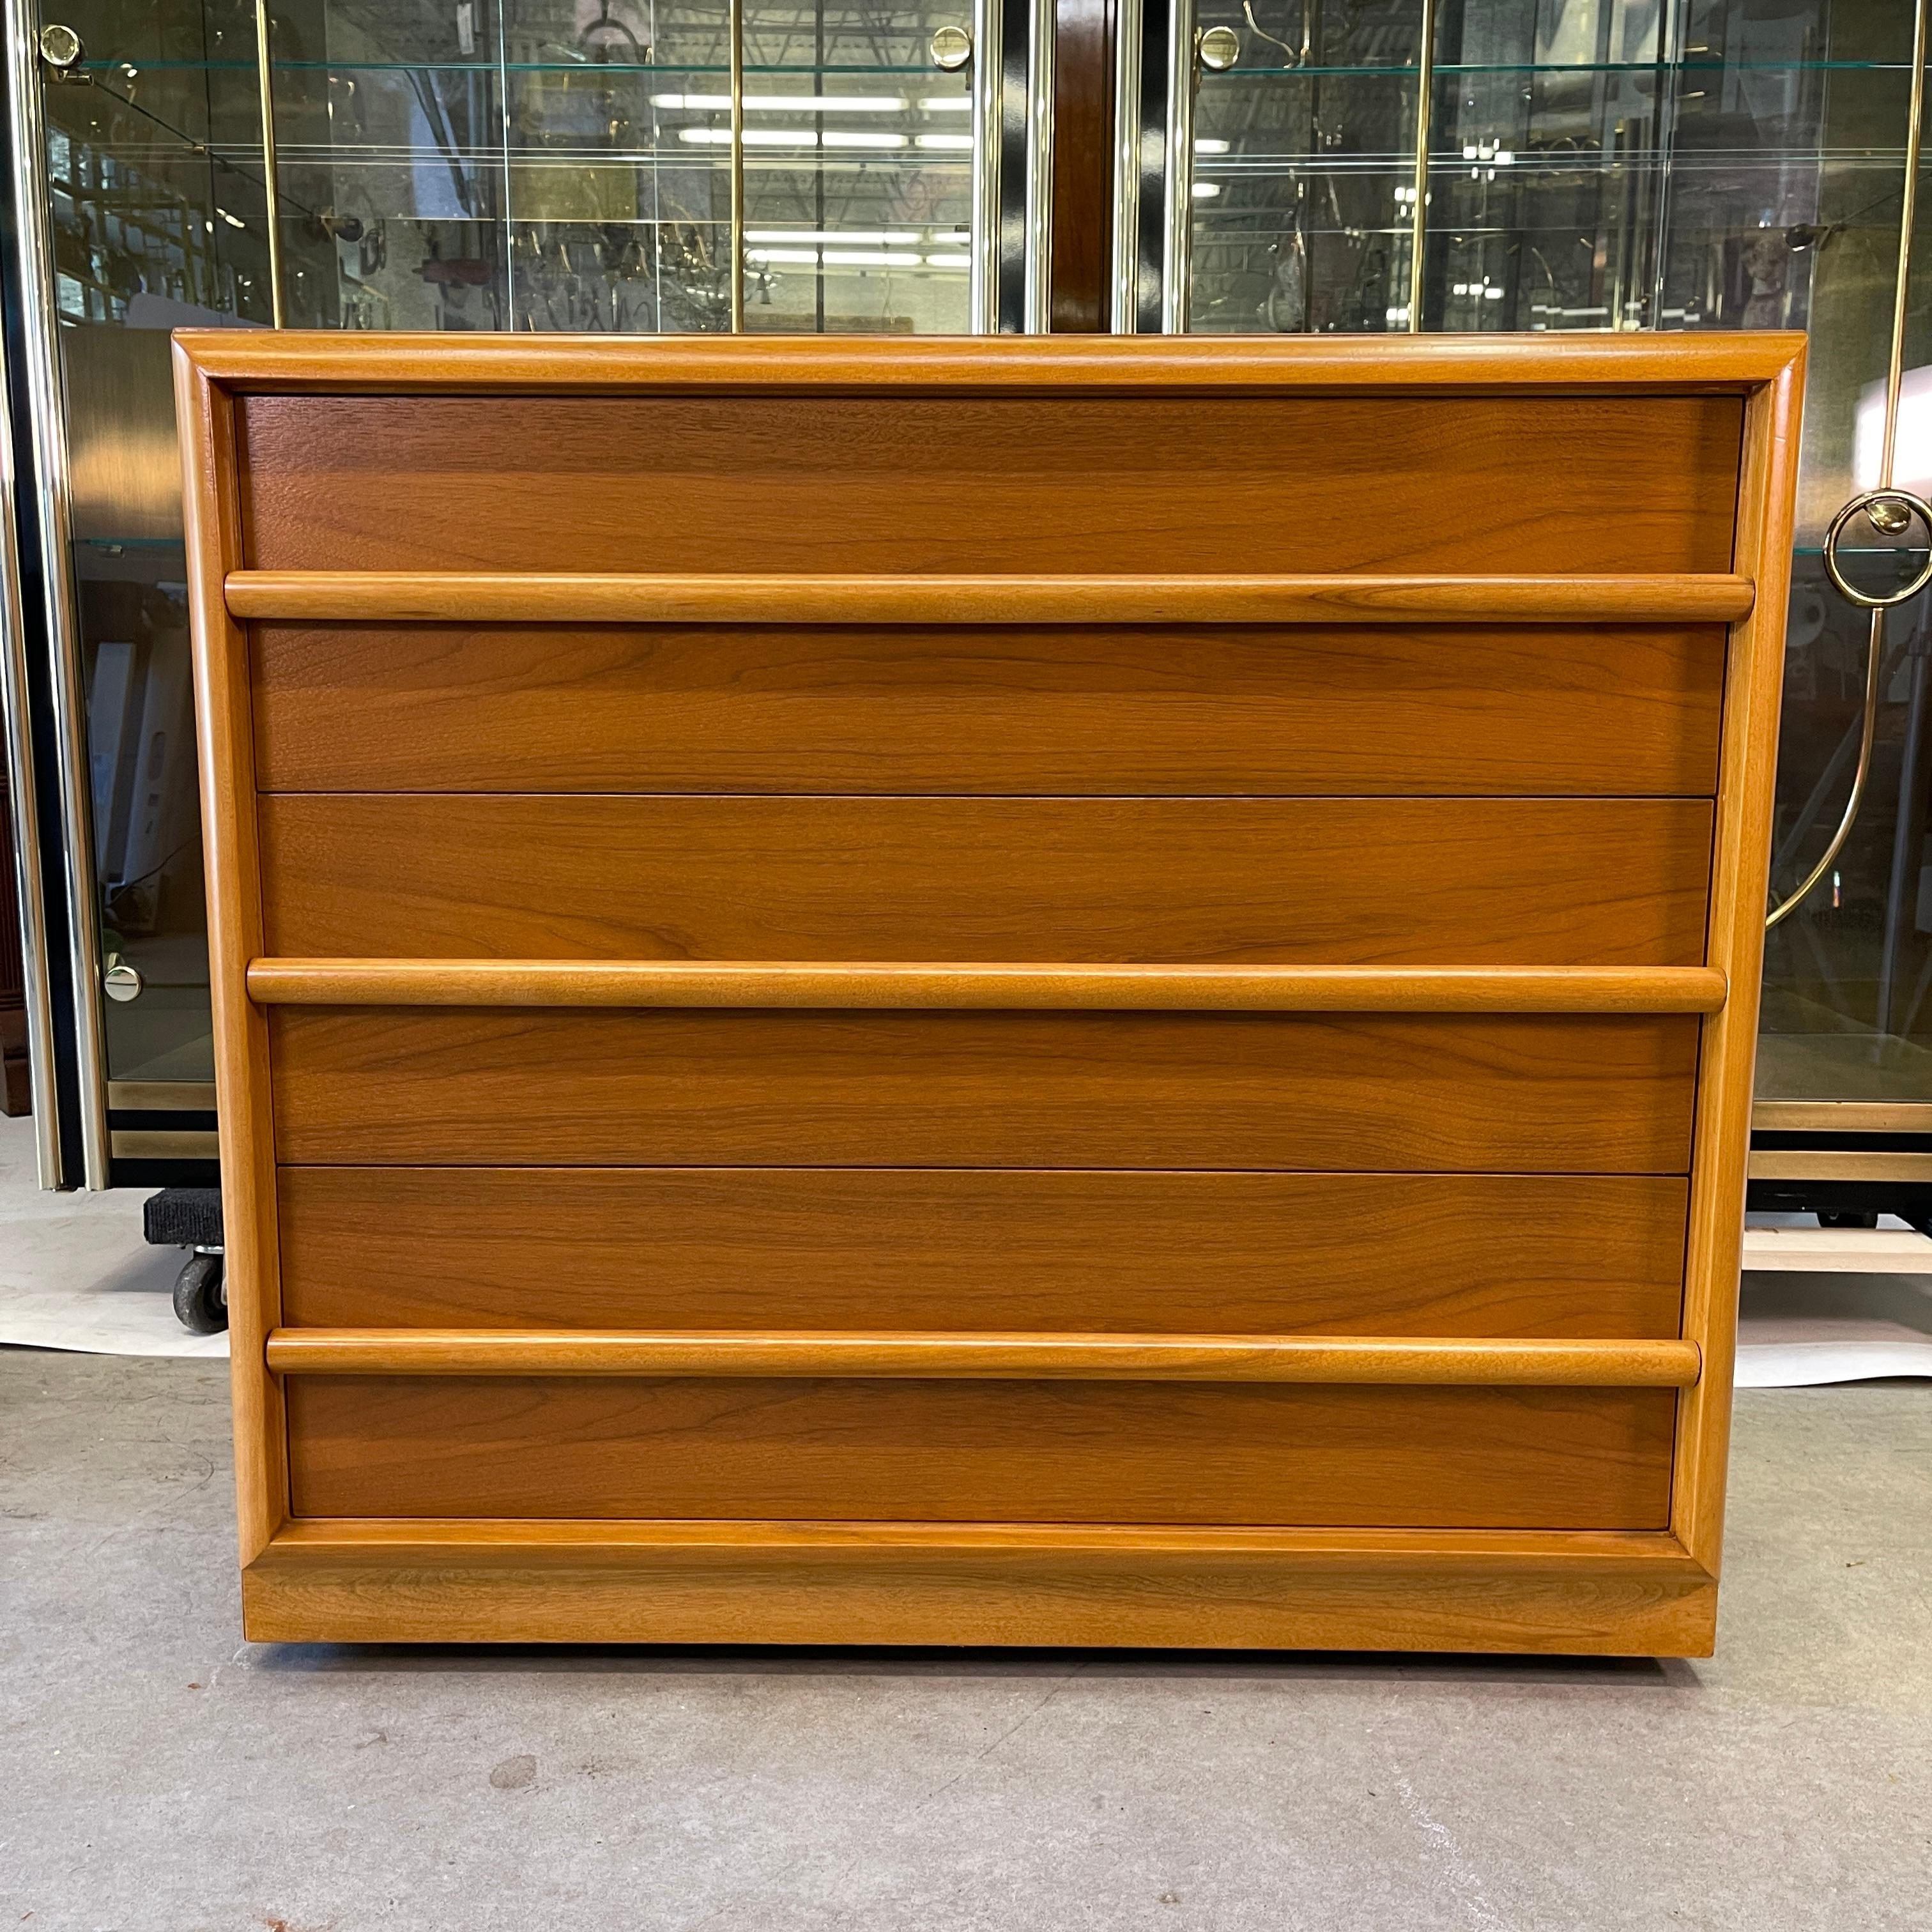 Pair of American classical modern chests of drawers designed by Robsjohn-Gibbings for Widdicomb Furniture Co. in figured walnut with contrasting maple moldings. Both have original label in top drawer. Purchased from Paine Furniture of Boston in 1955